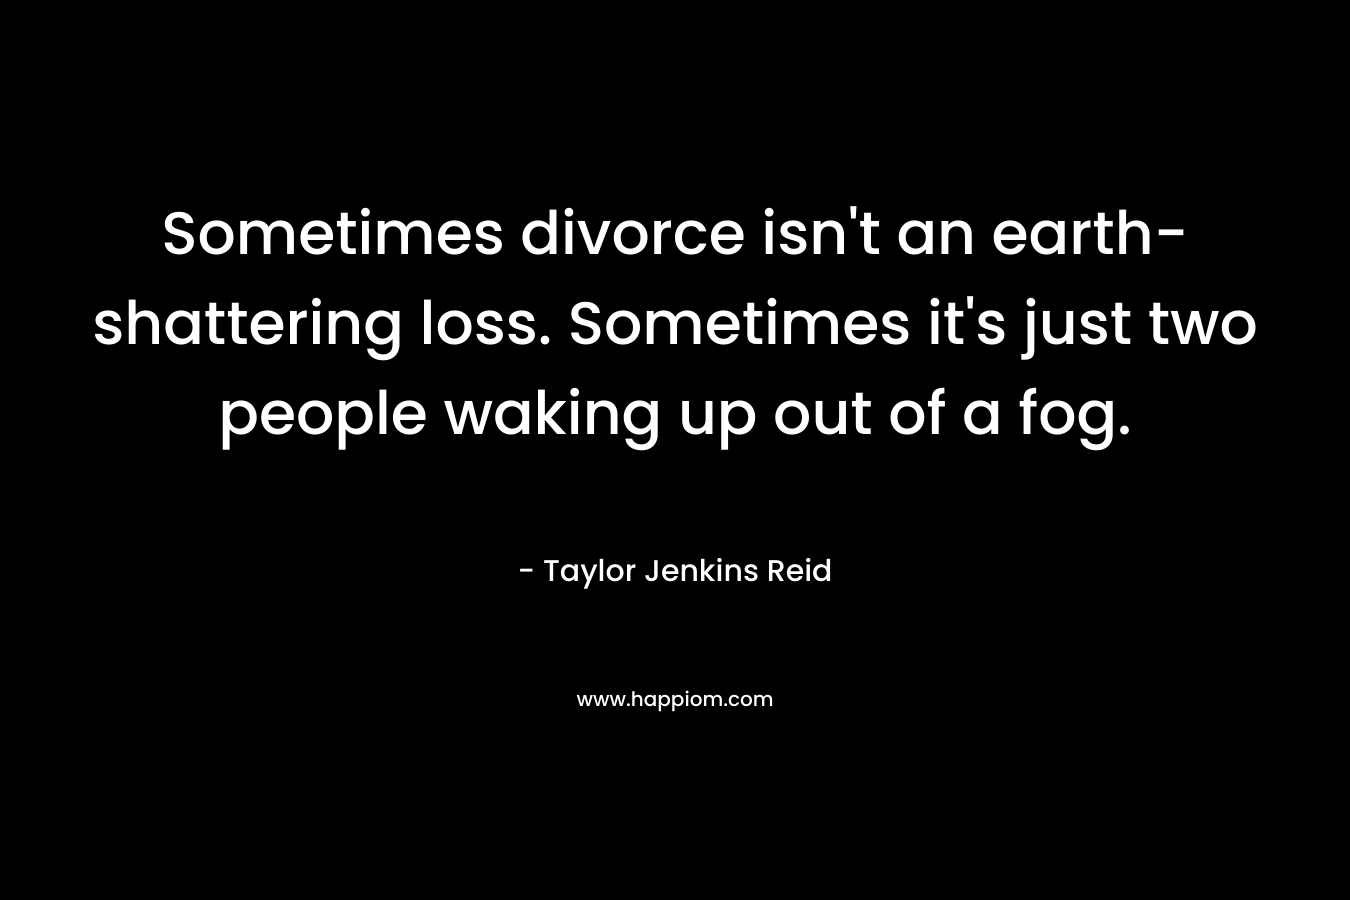 Sometimes divorce isn't an earth-shattering loss. Sometimes it's just two people waking up out of a fog.